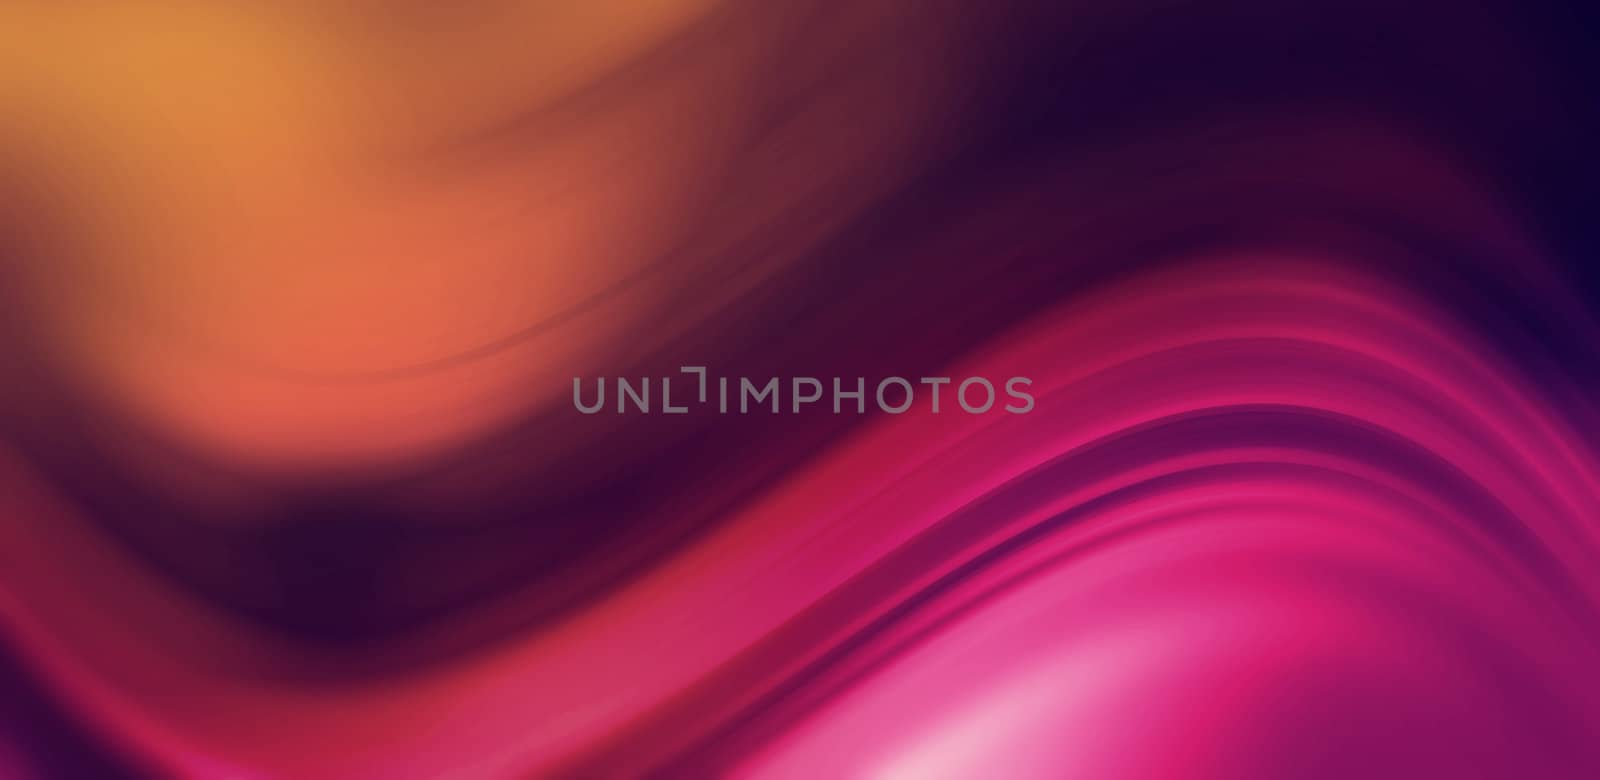 Abstract background image with meshed blurry colors in wave form